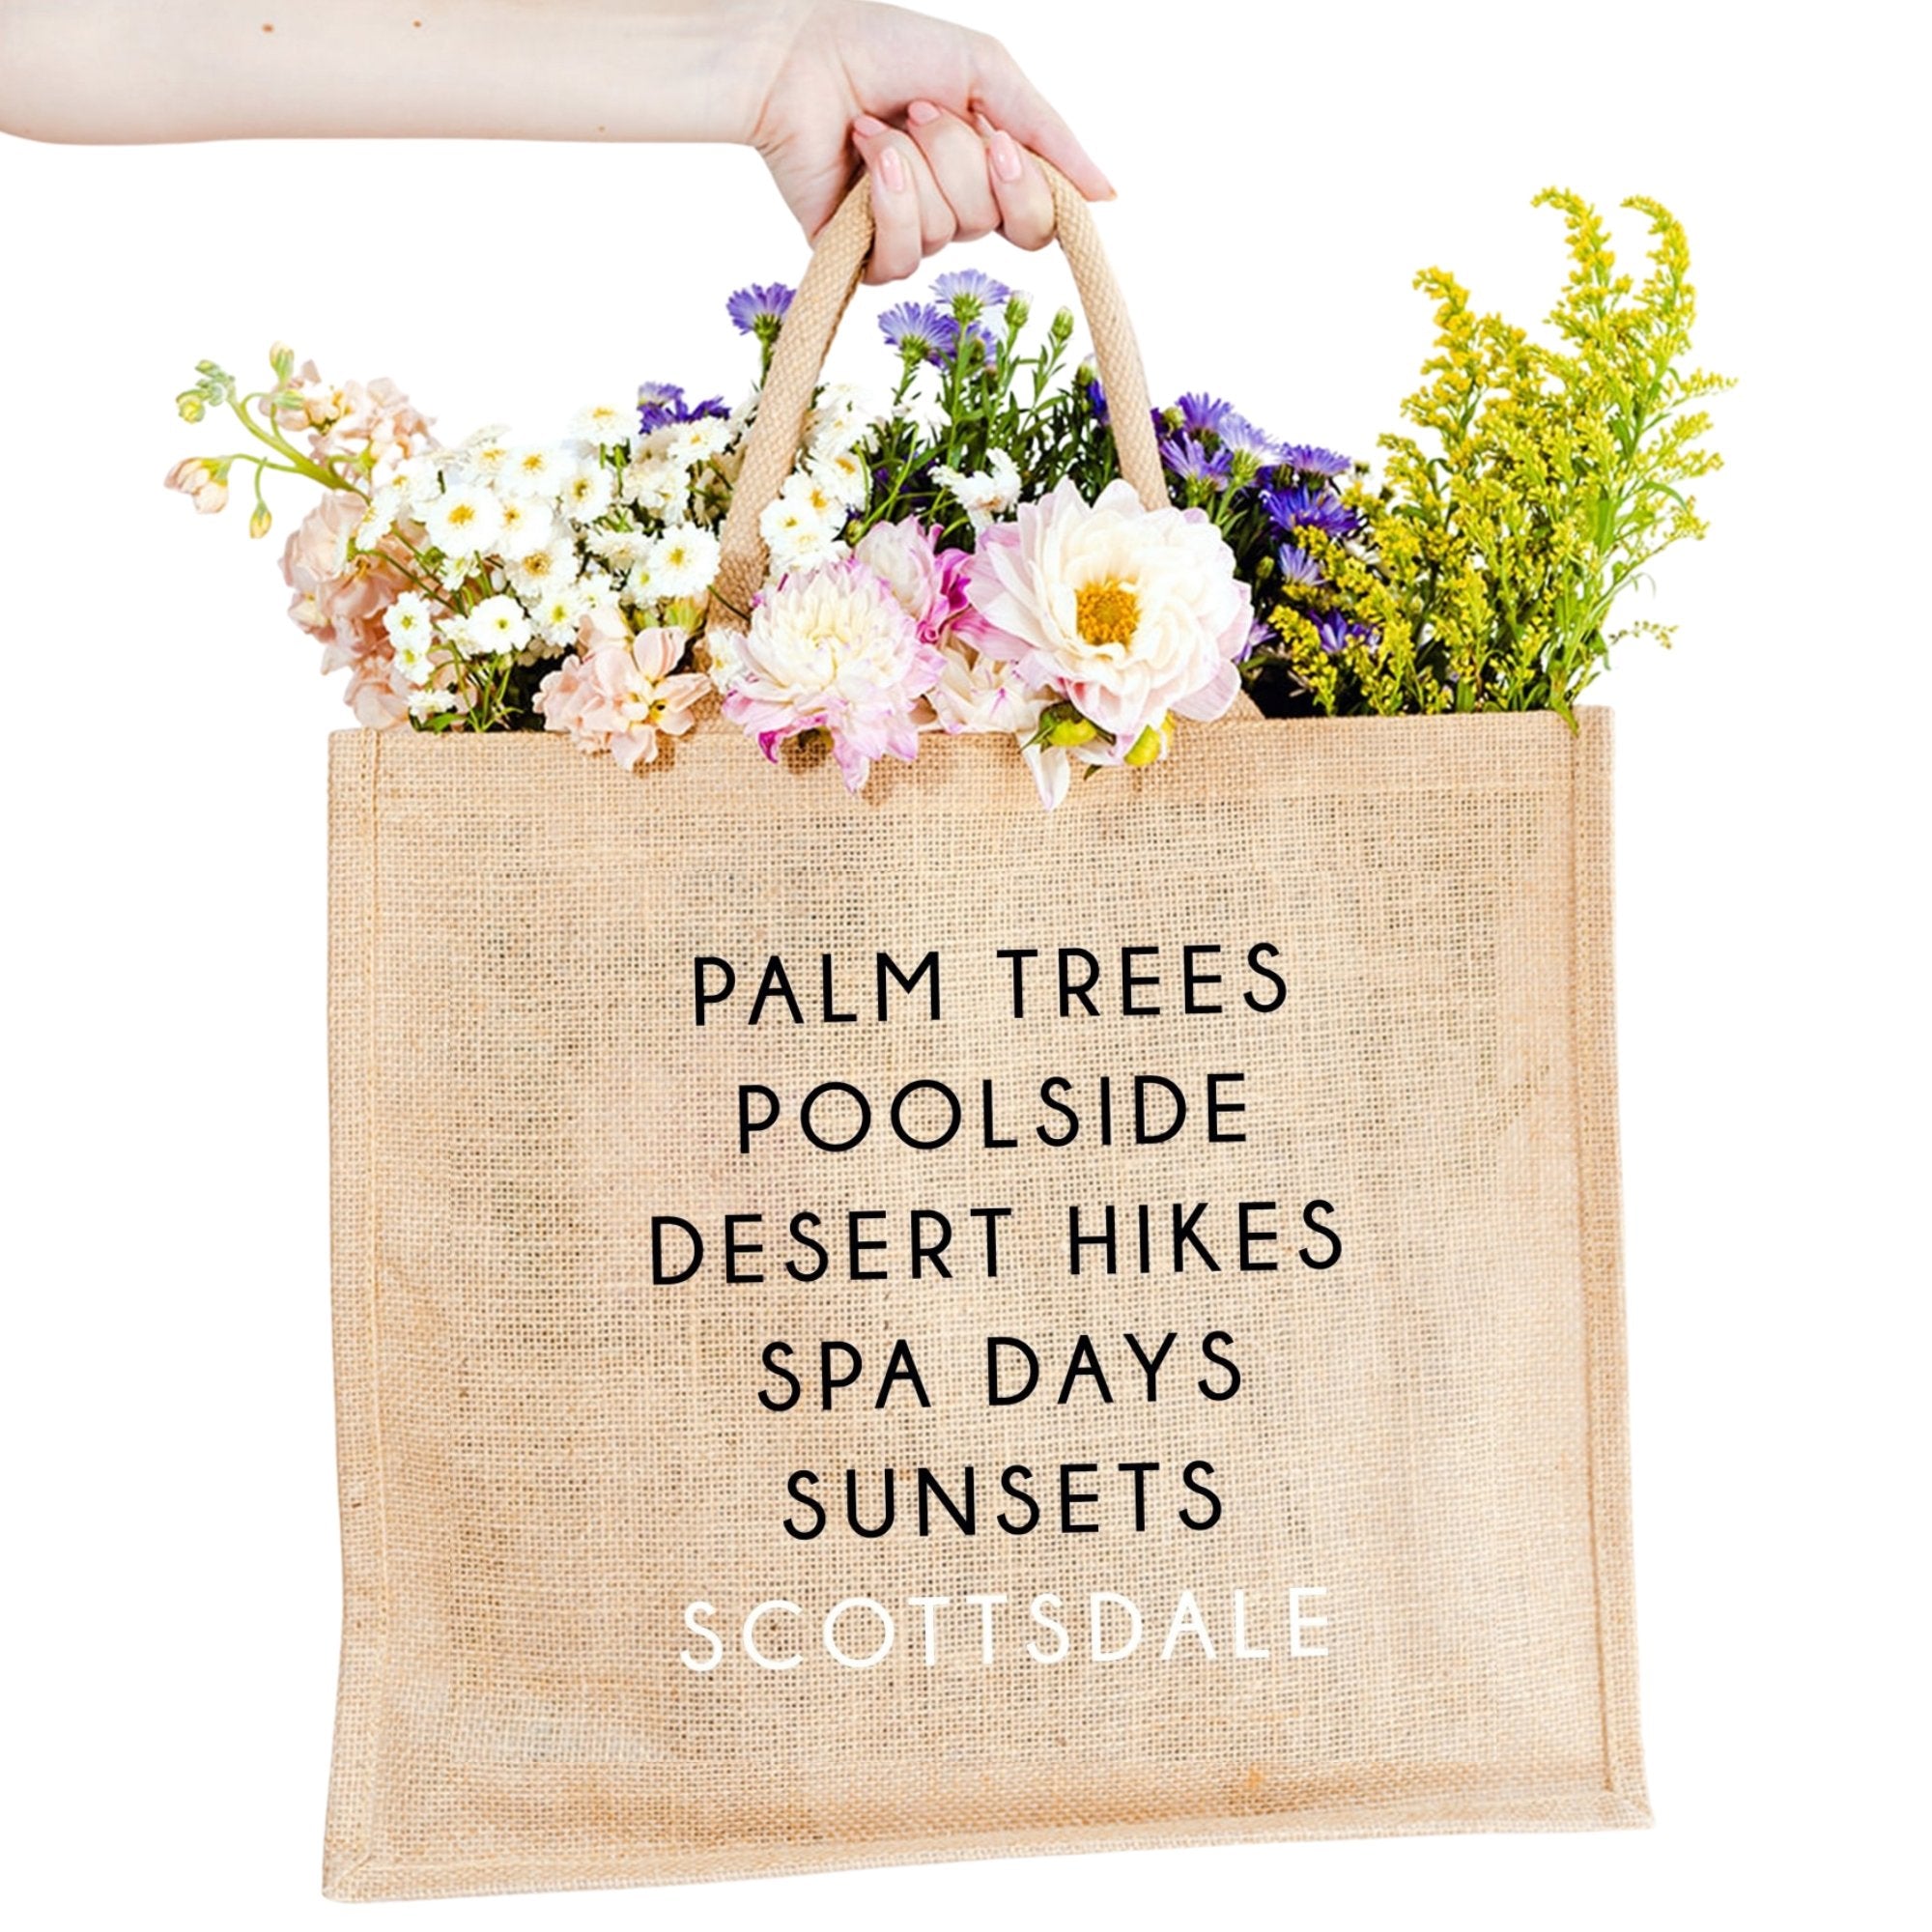 A jute carryall tote customized with sayings about Scottsdale